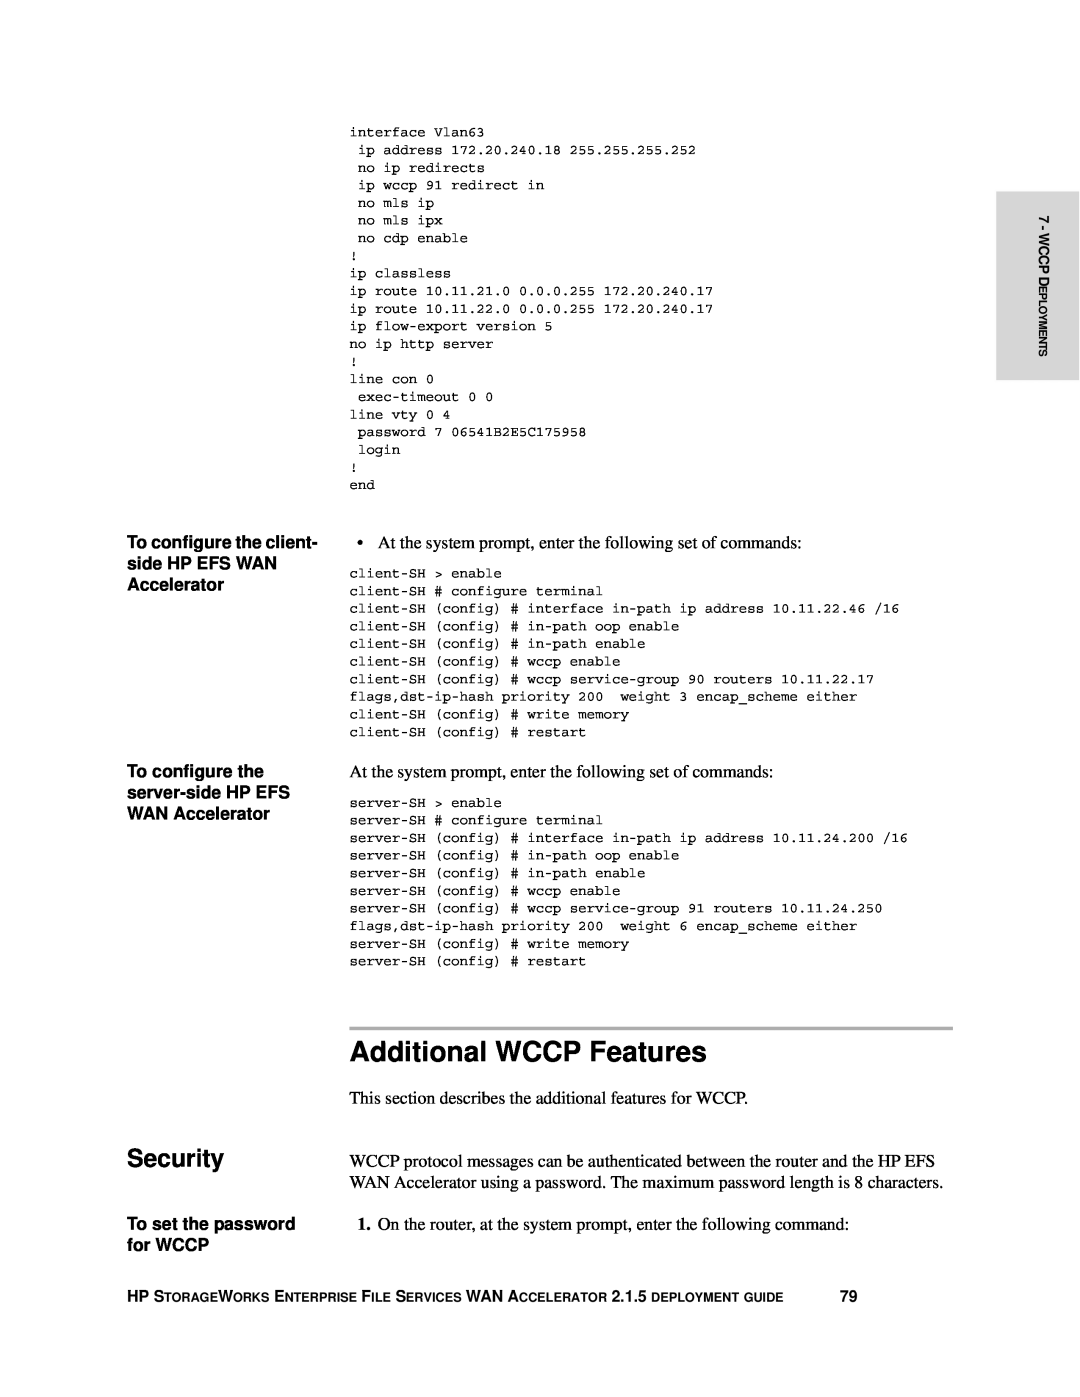 HP Enterprise File Services WAN Accelerator manual Additional WCCP Features, Security, To set the password, for WCCP 